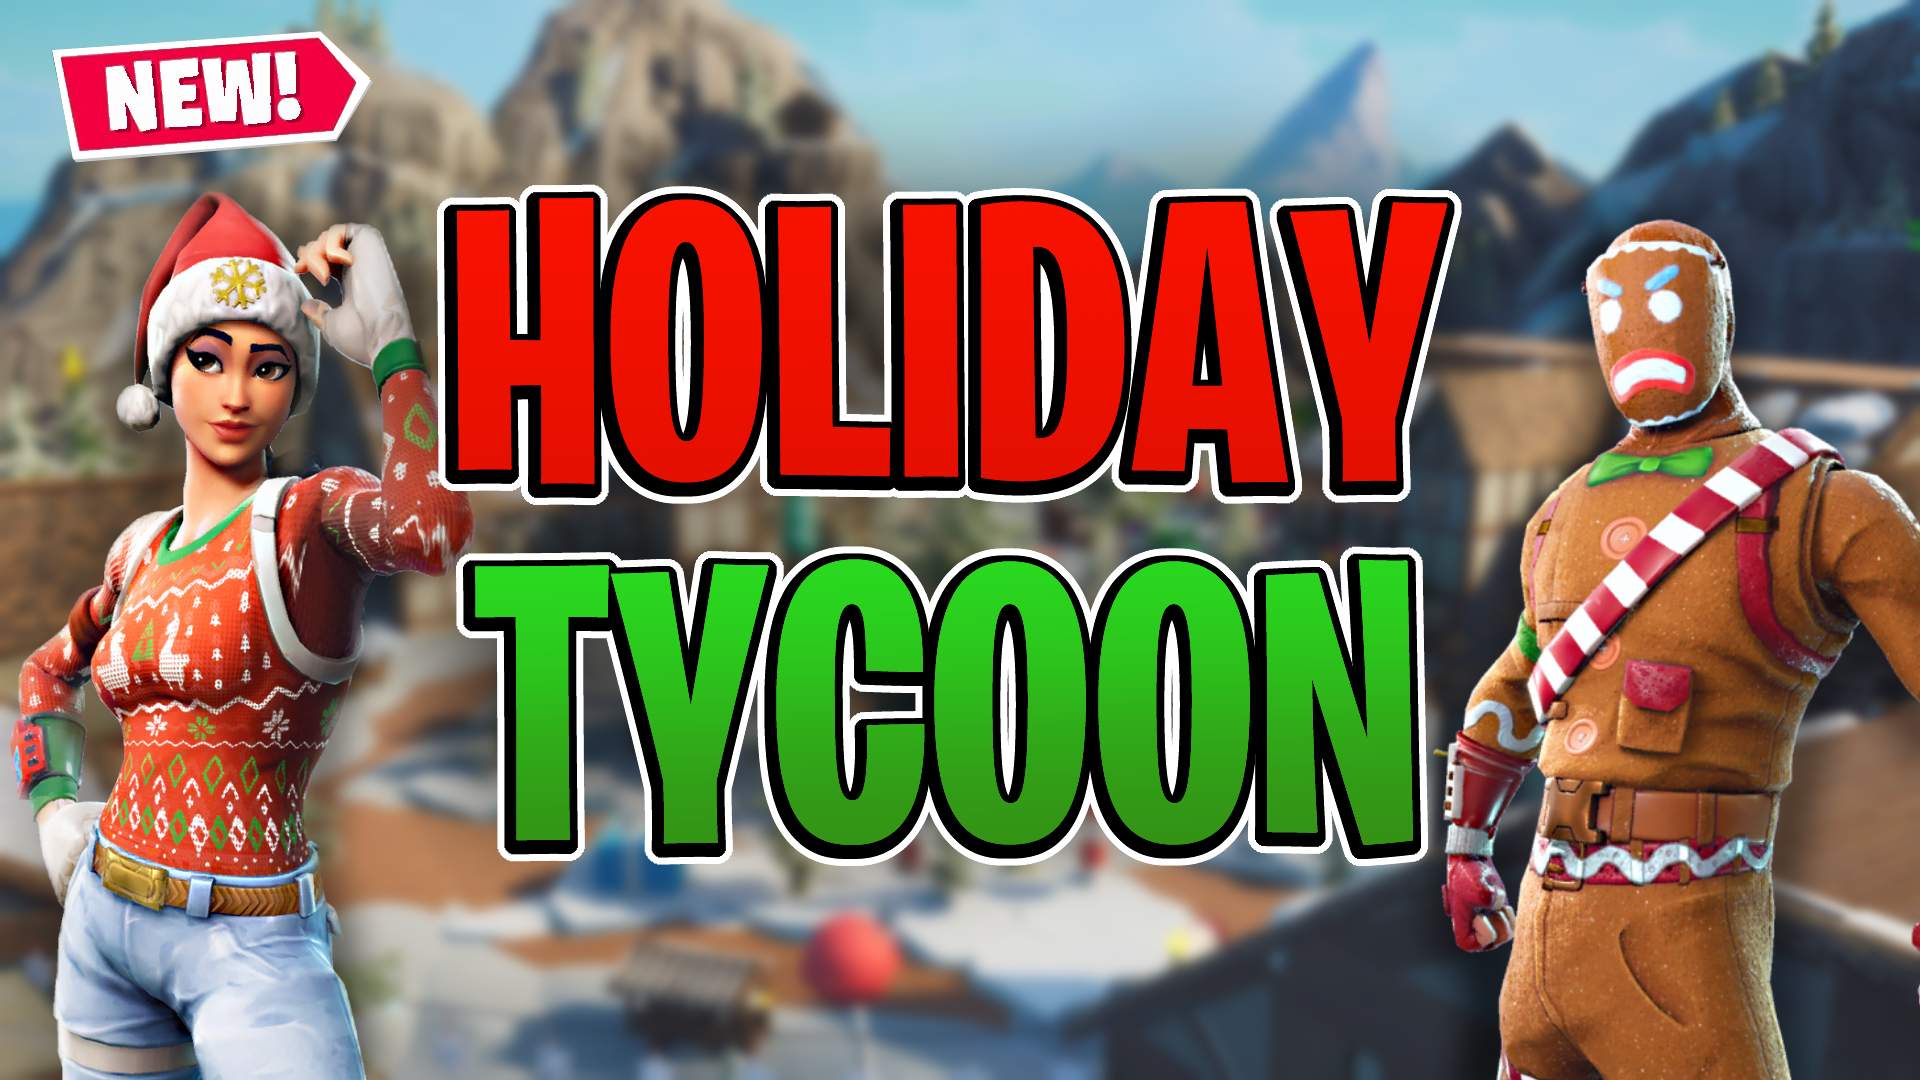 WAR TYCOON 2 ❄️ [ notales ] – Fortnite Creative Map Code